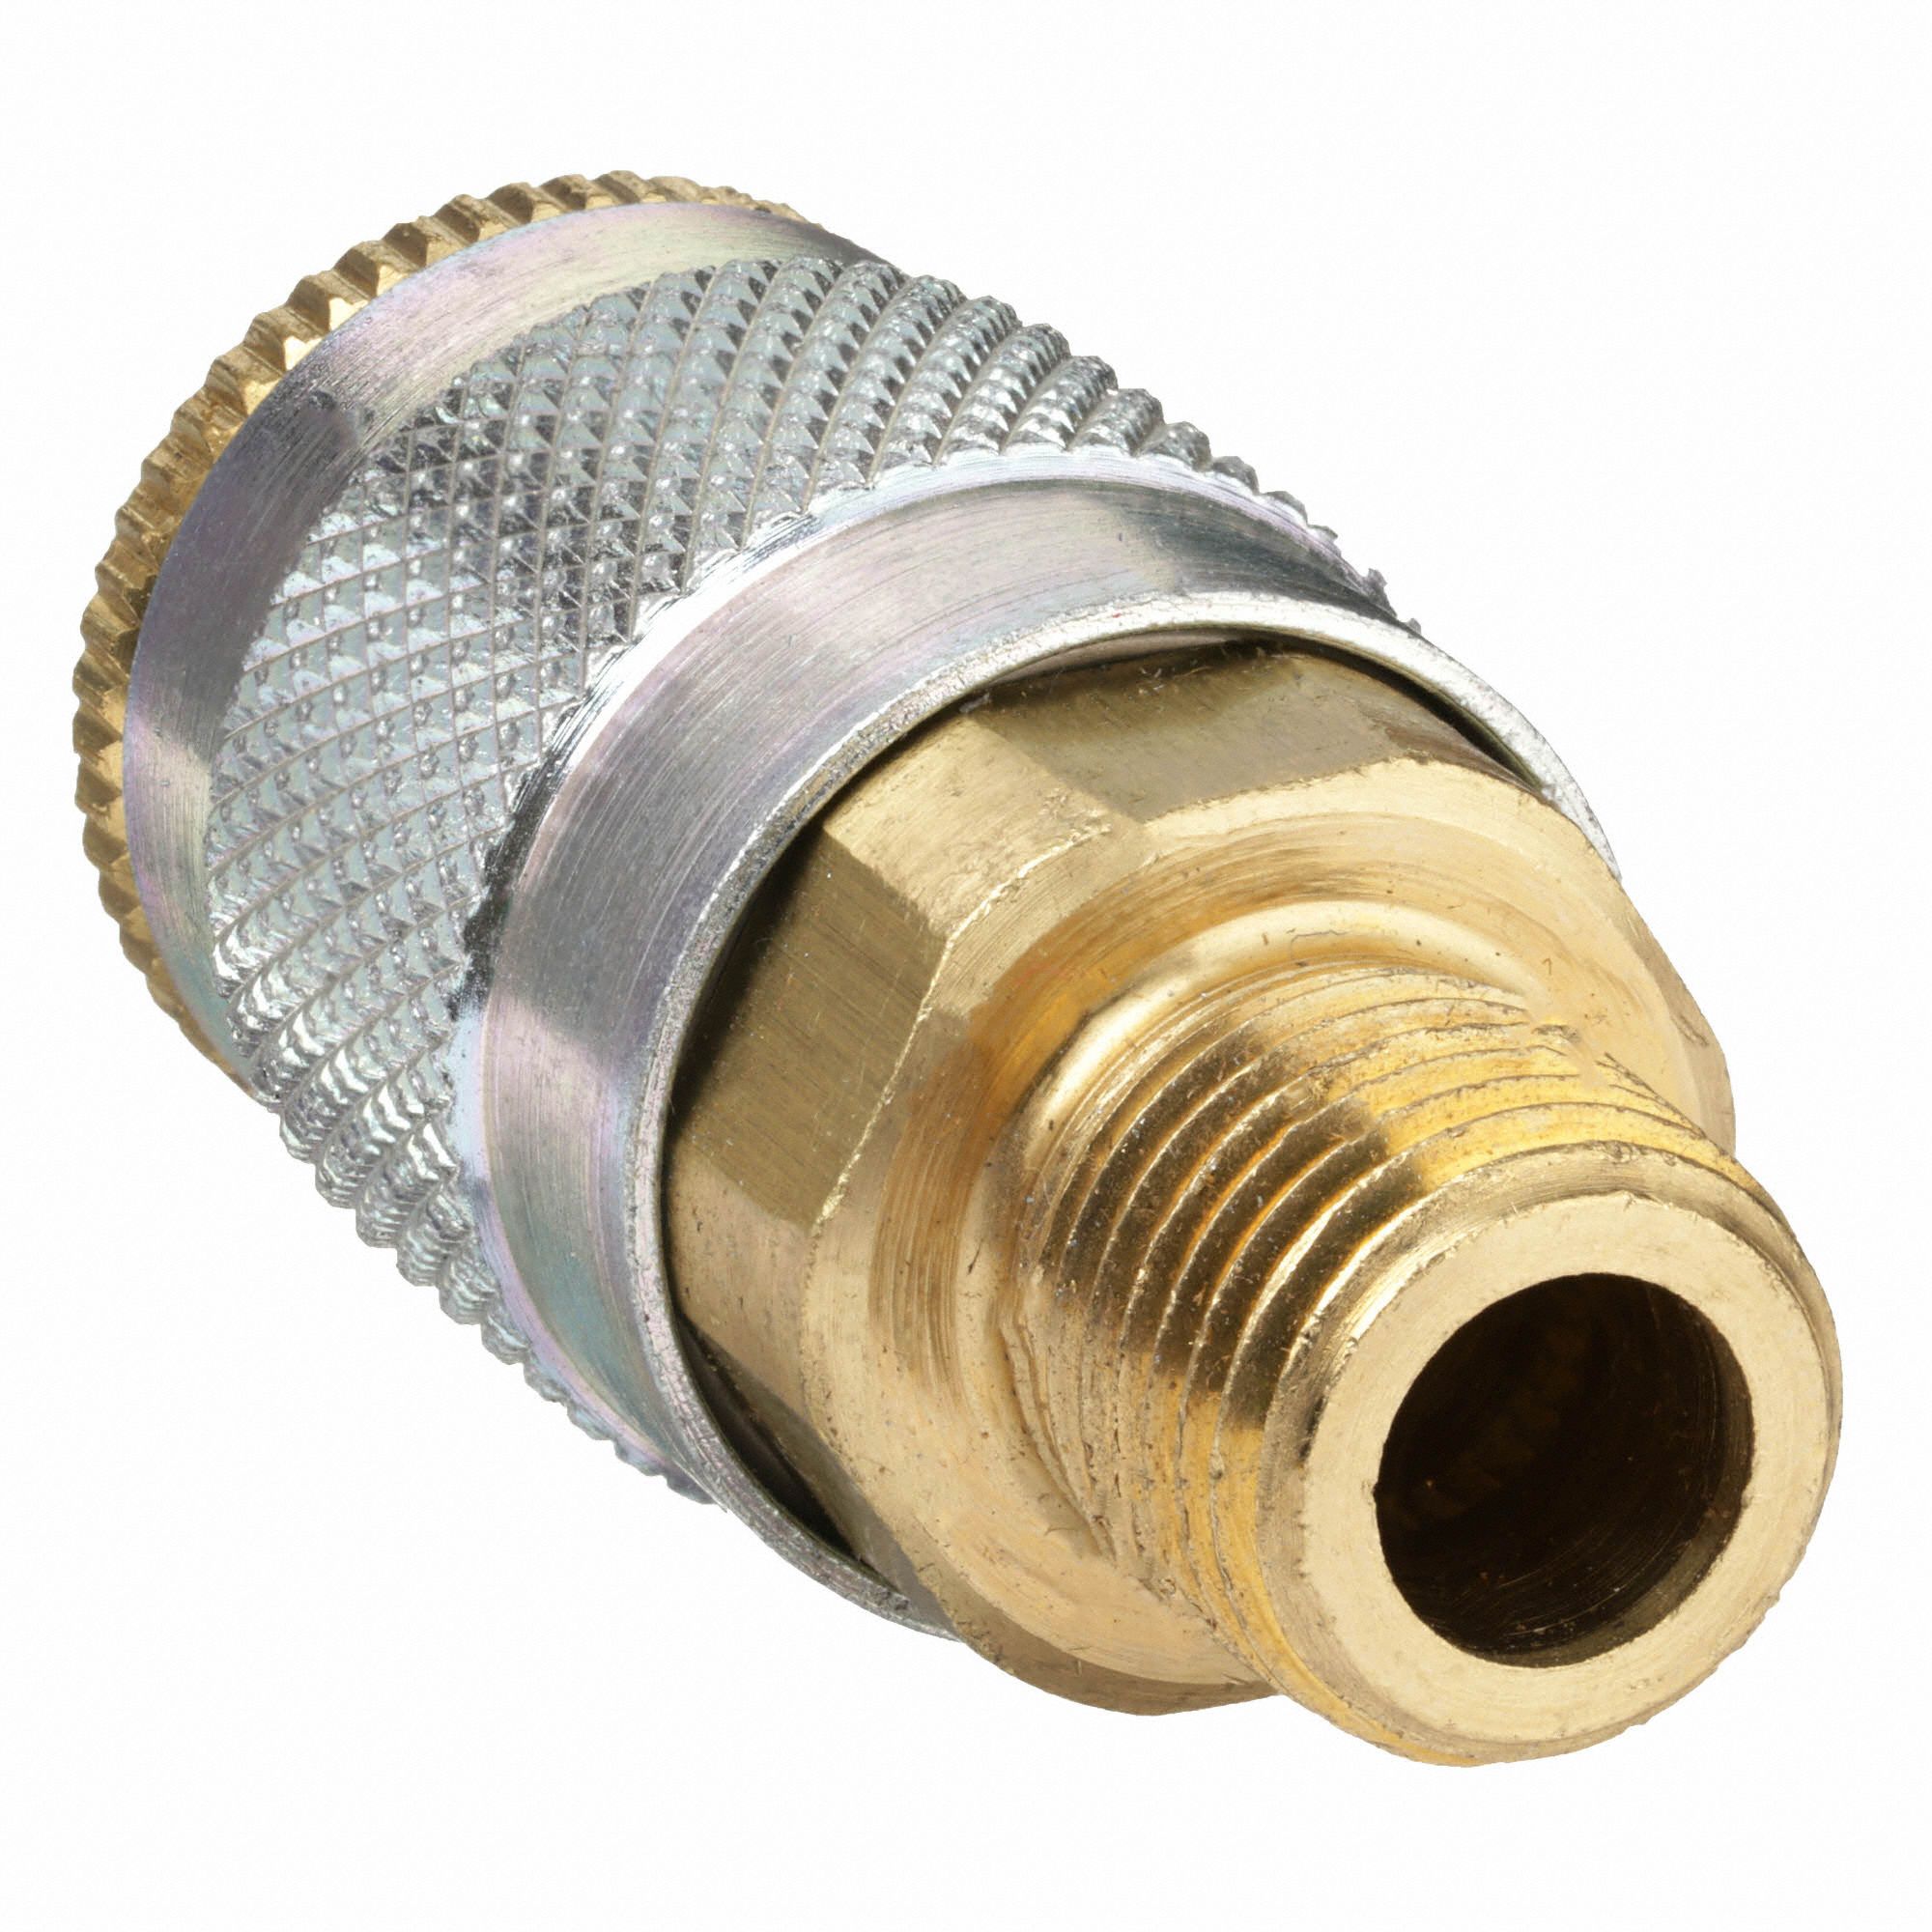 DIXON VALVE & COUPLING Quick Connect Hose Coupling: 1/4 in Body Size, 1 ...